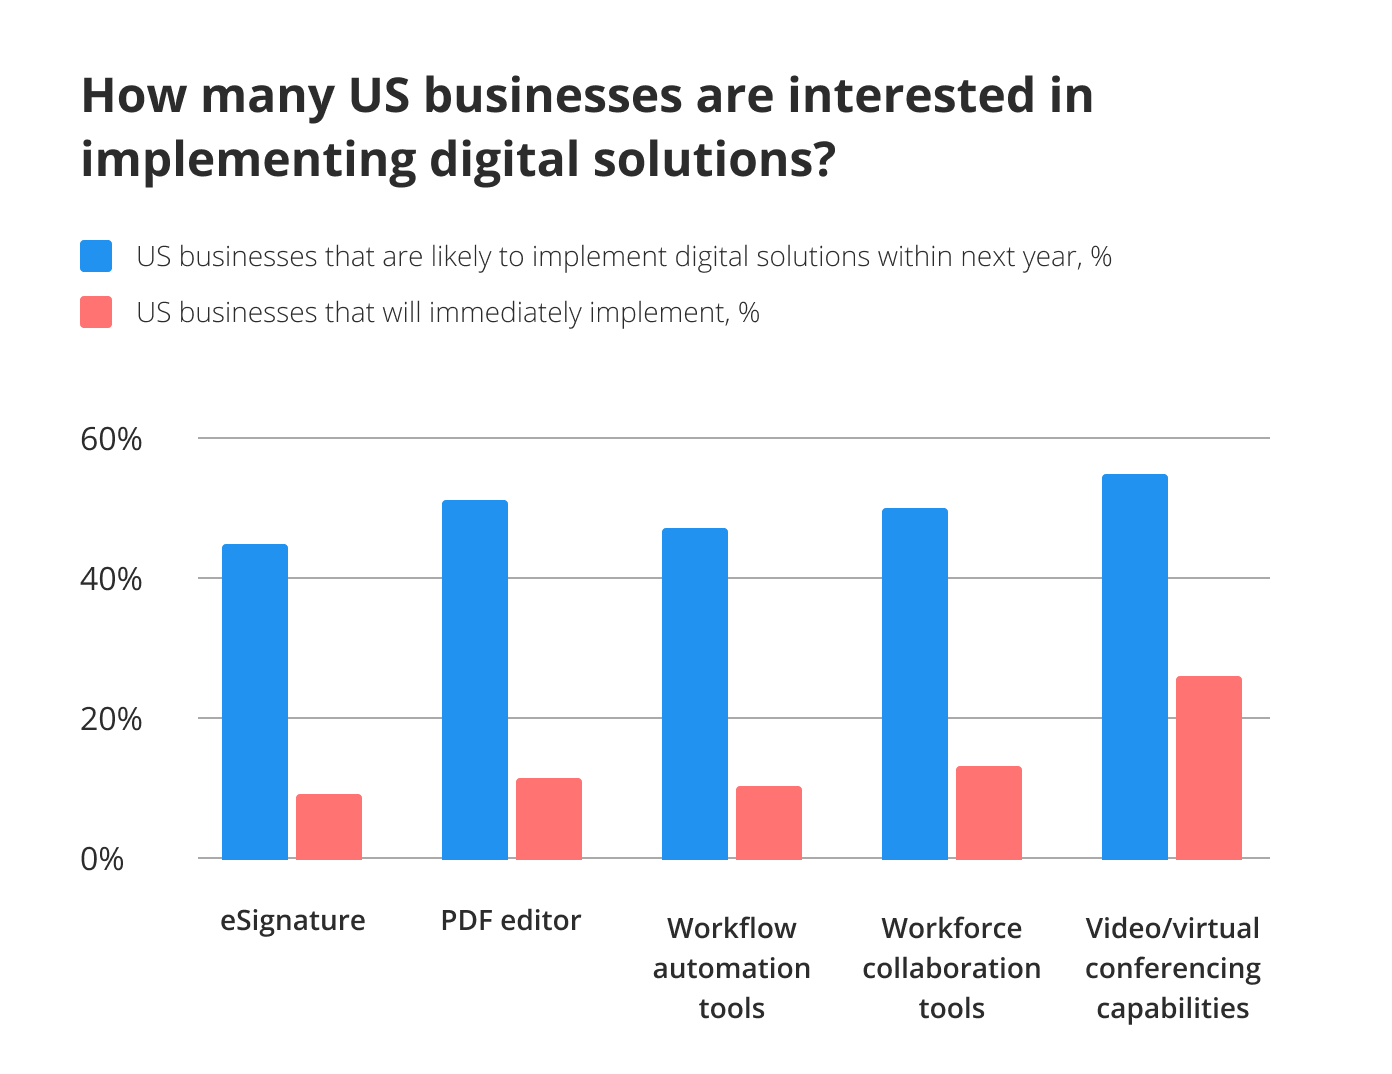 Digitizing video/virtual conferencing capabilities is a priority for 56% of respondents - comparative diagram